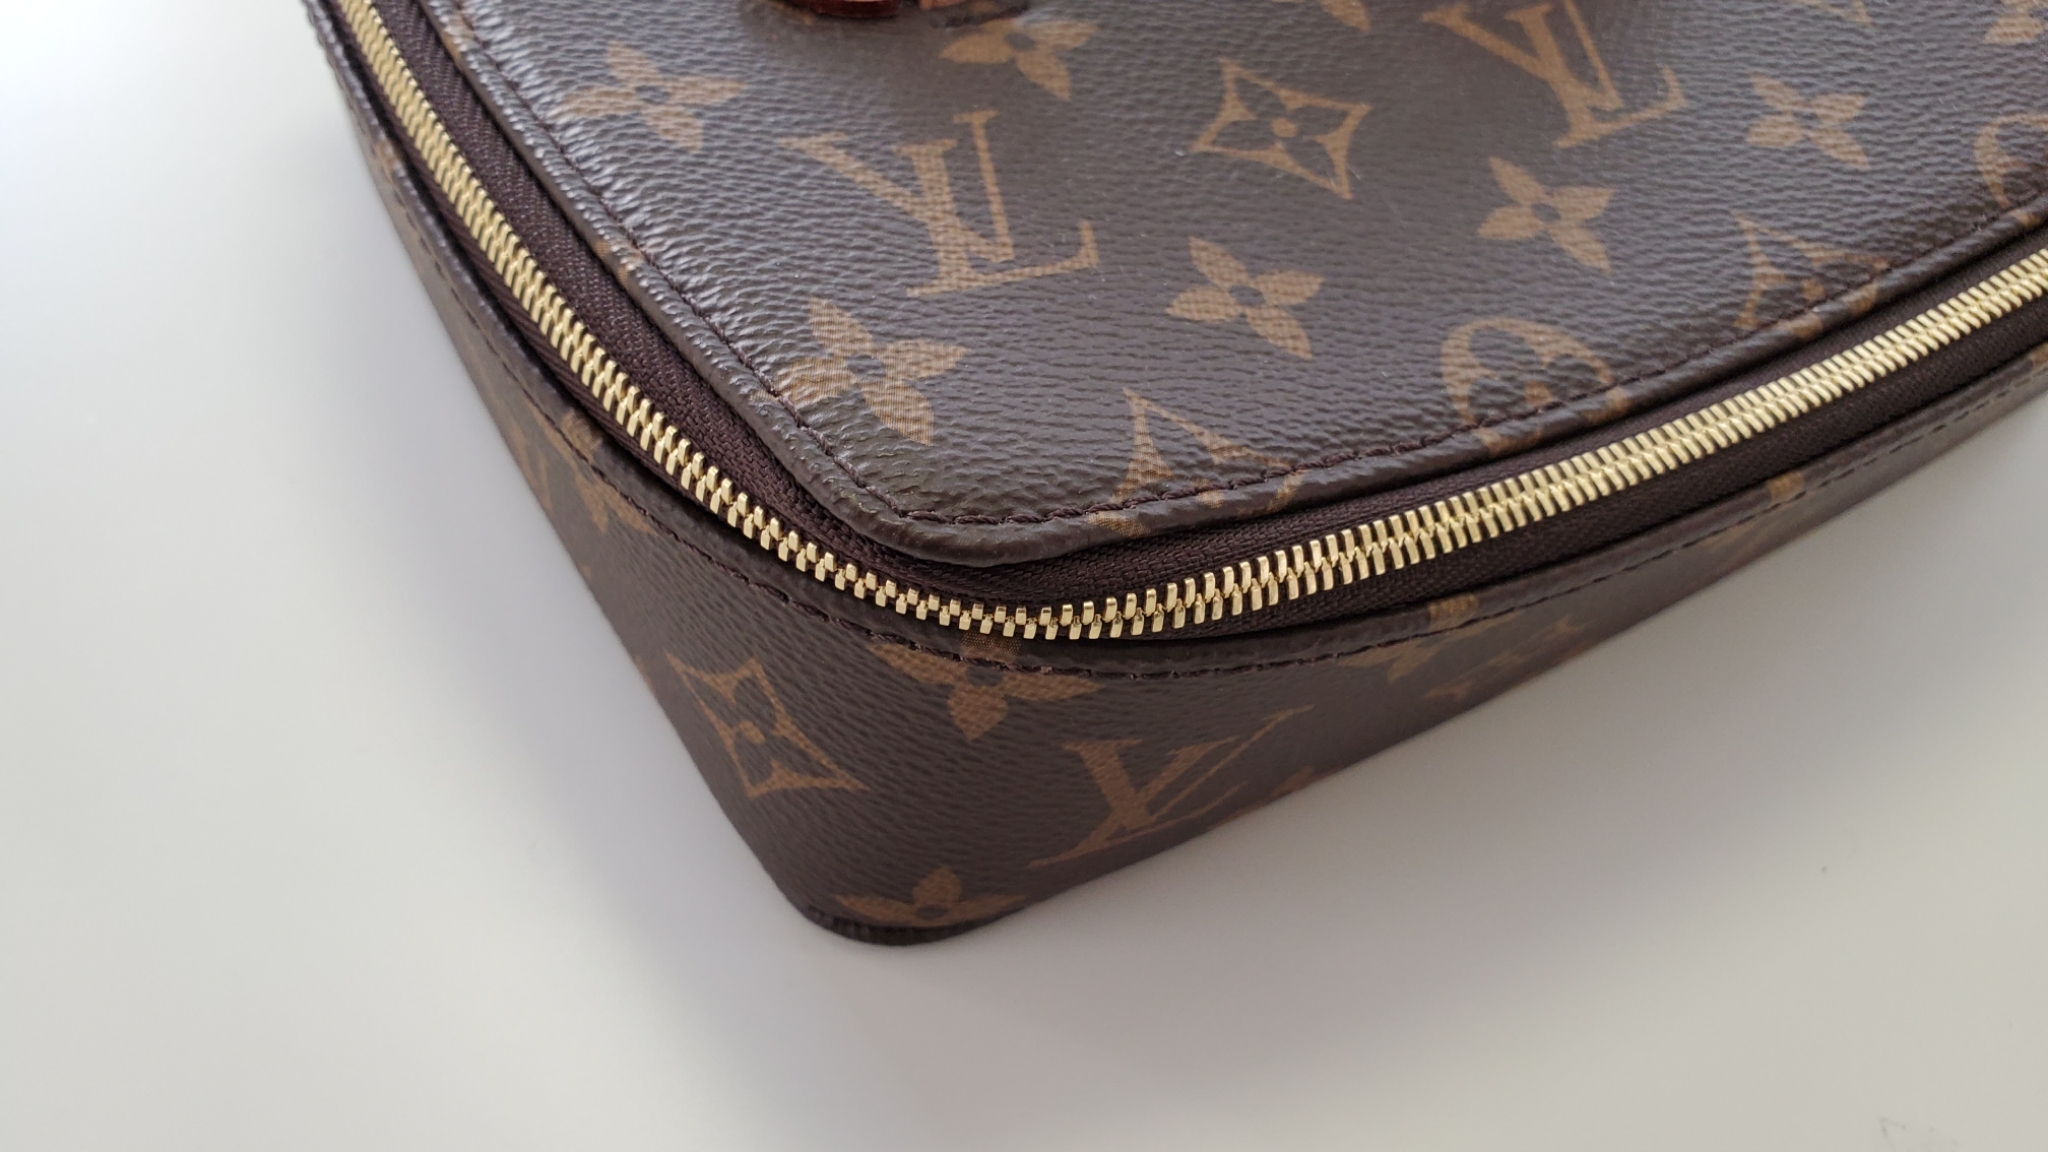 Buy Authentic Pre-owned Louis Vuitton Monogram Satin Pliable Trousse Bijoux Jewelry  Case M92329 152606 from Japan - Buy authentic Plus exclusive items from  Japan